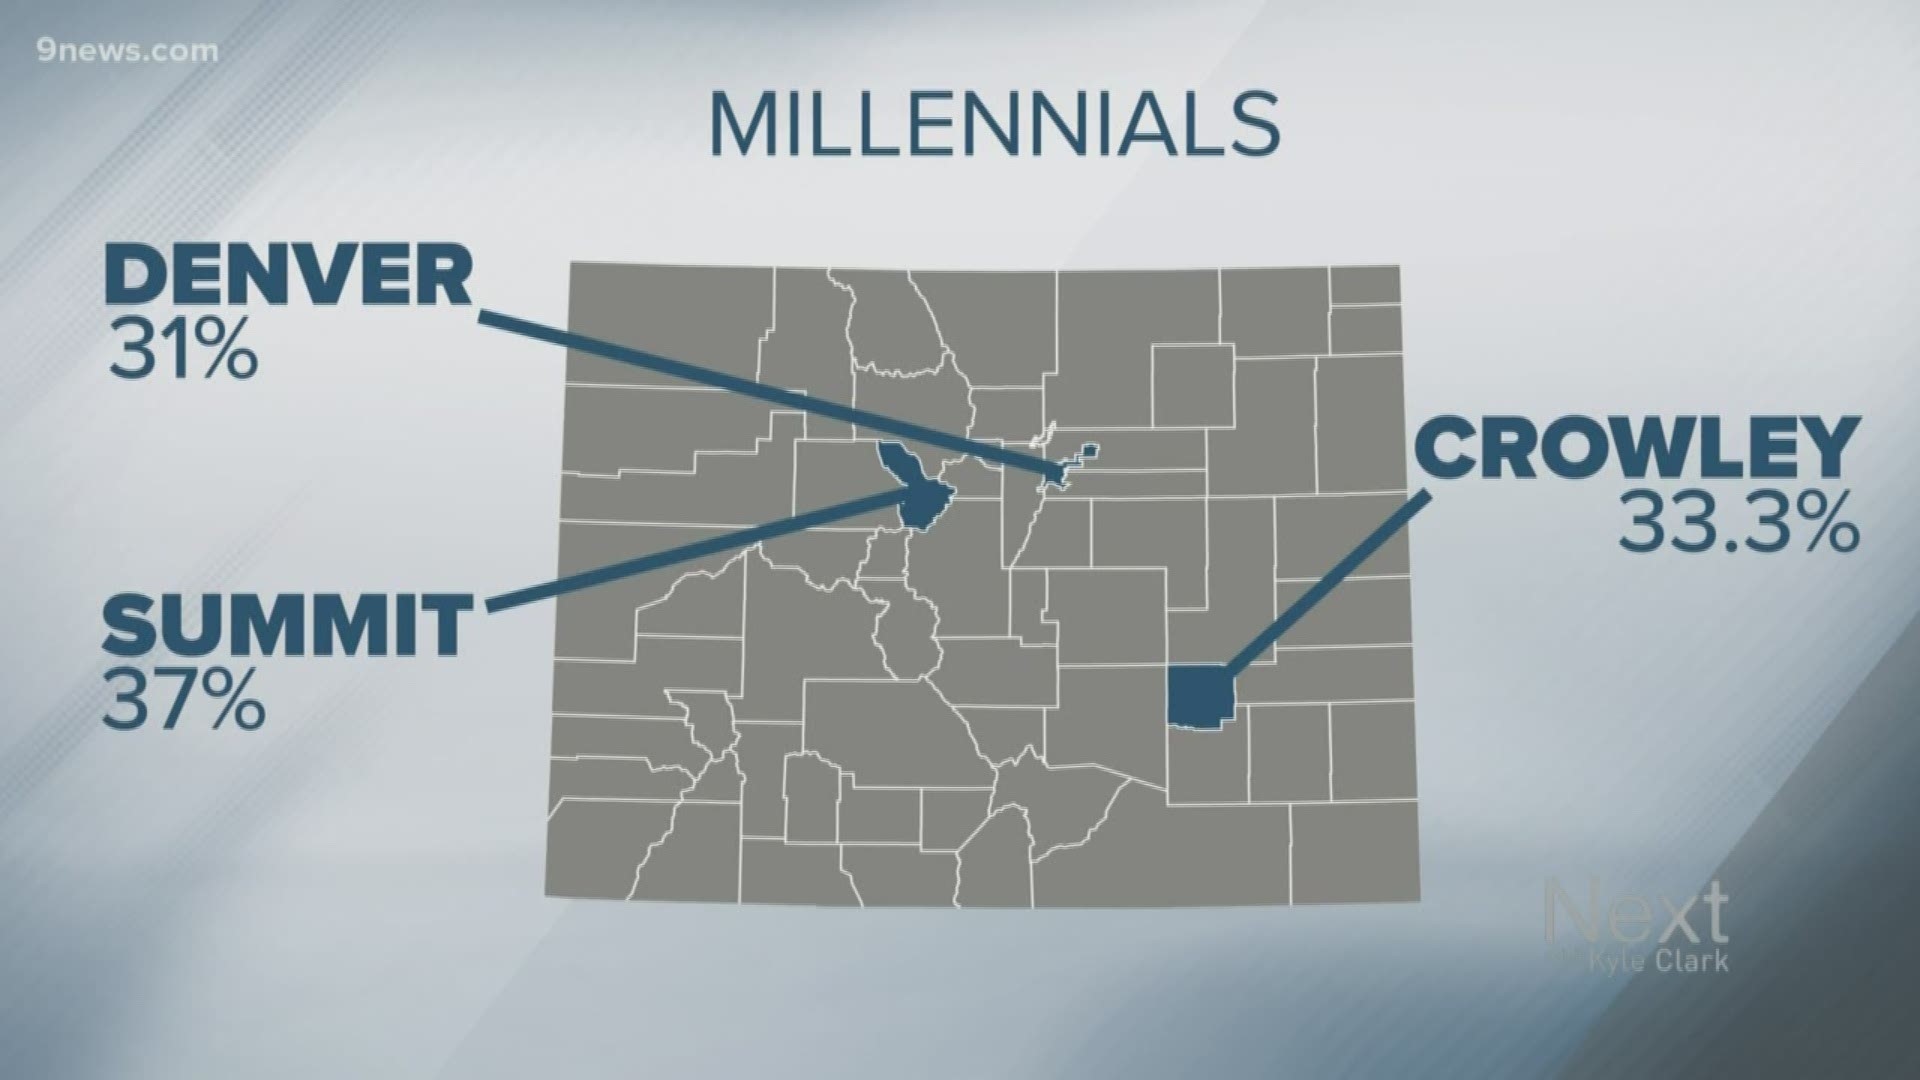 Millennials are the largest generation in Colorado today. Same is true for the US as a whole.